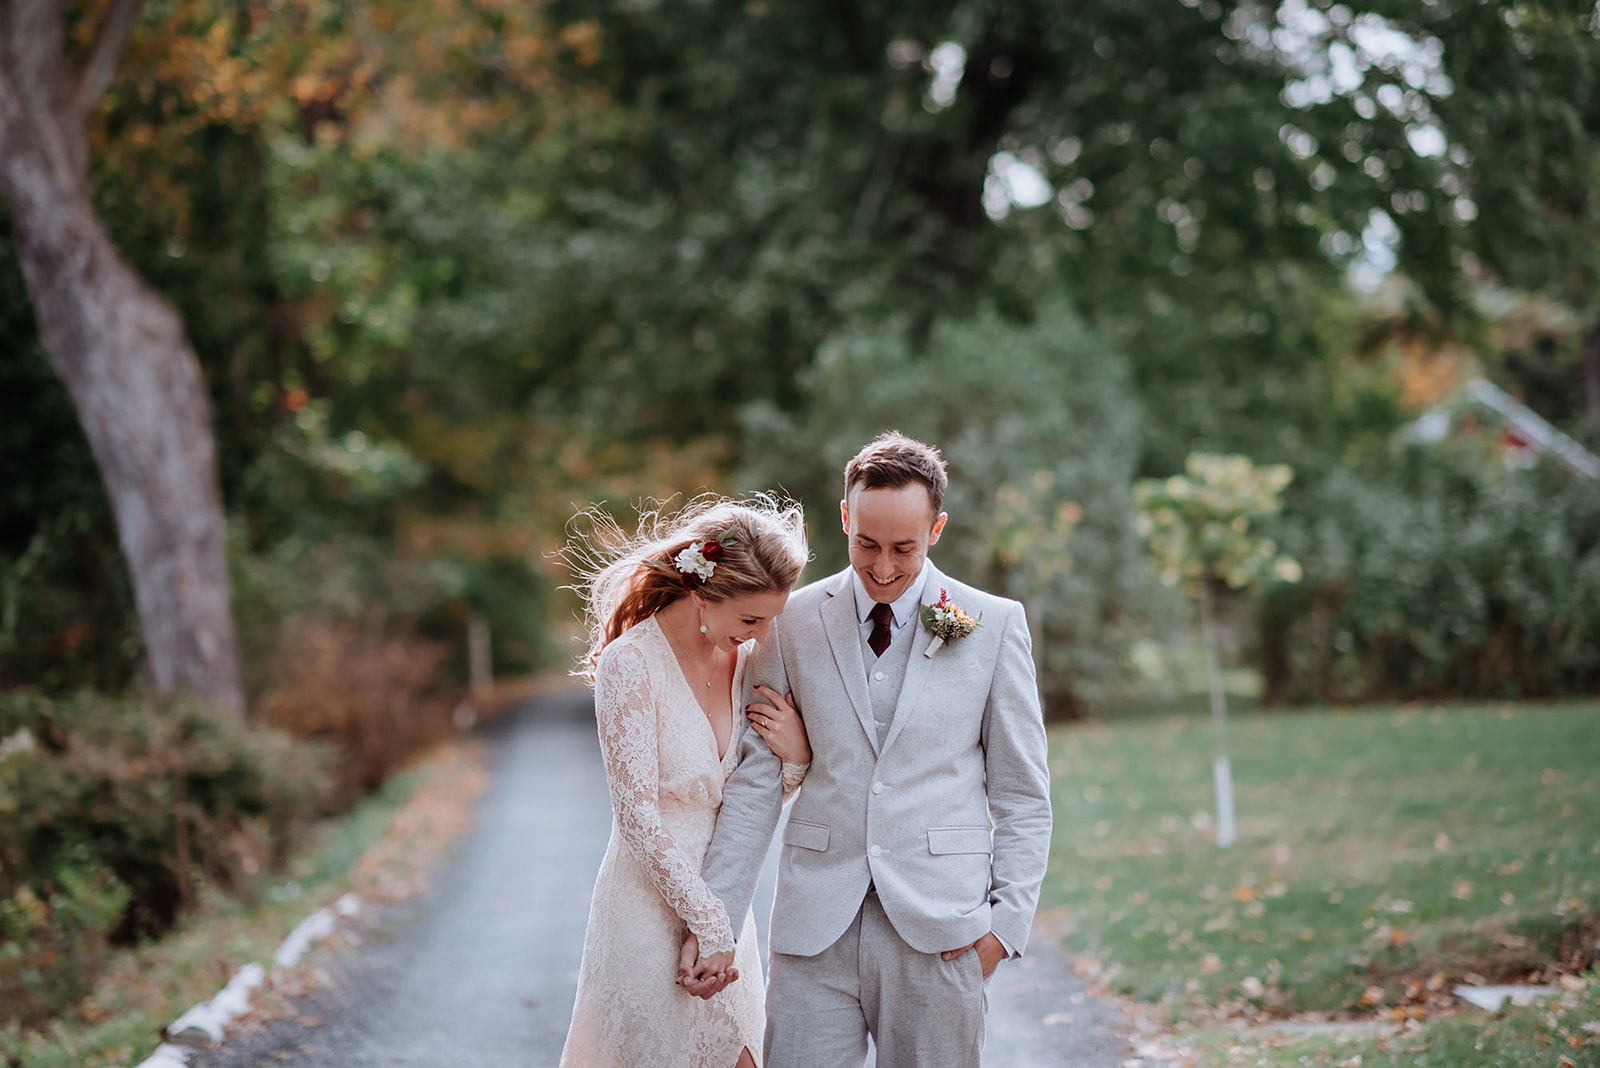 Couple shares an honest and authentic moment during their wedding day portraits.